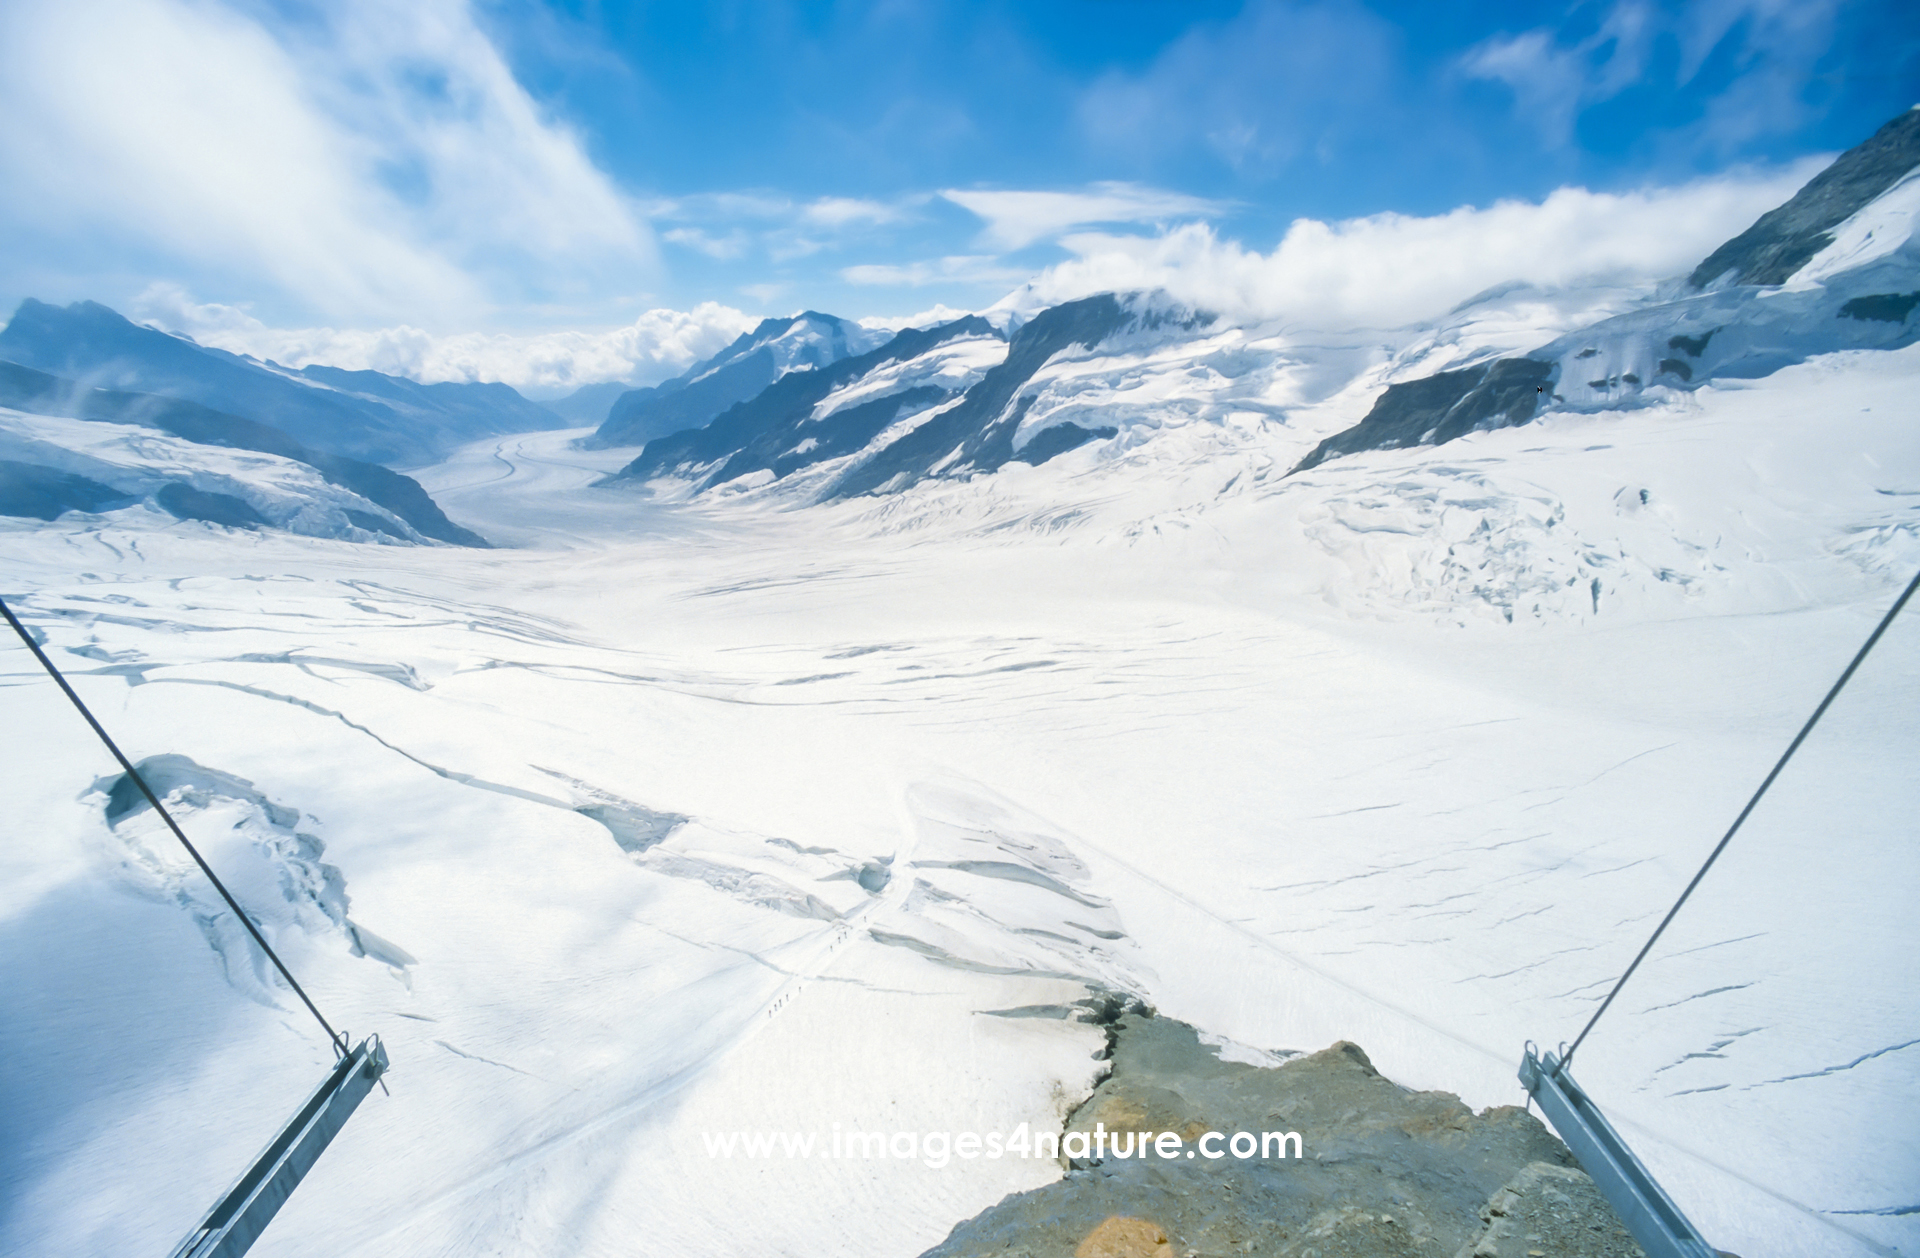 Scenic view of Aletsch glacier and mountains from Jungfraujoch